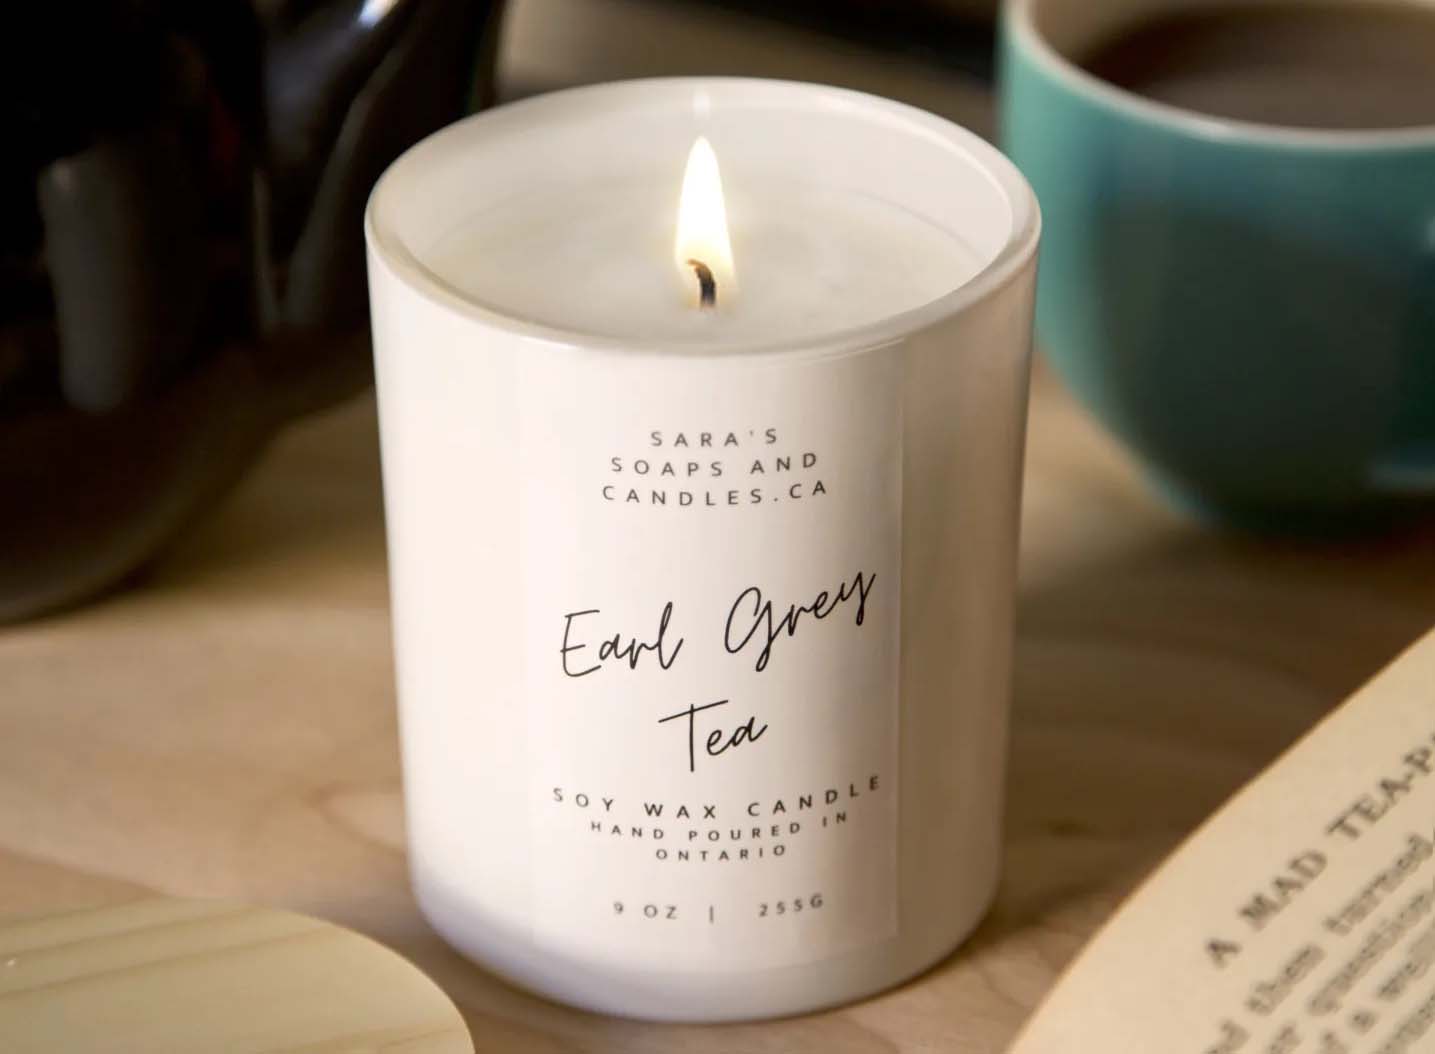 Earl Grey Tea candle from Sara's Soaps and Candles